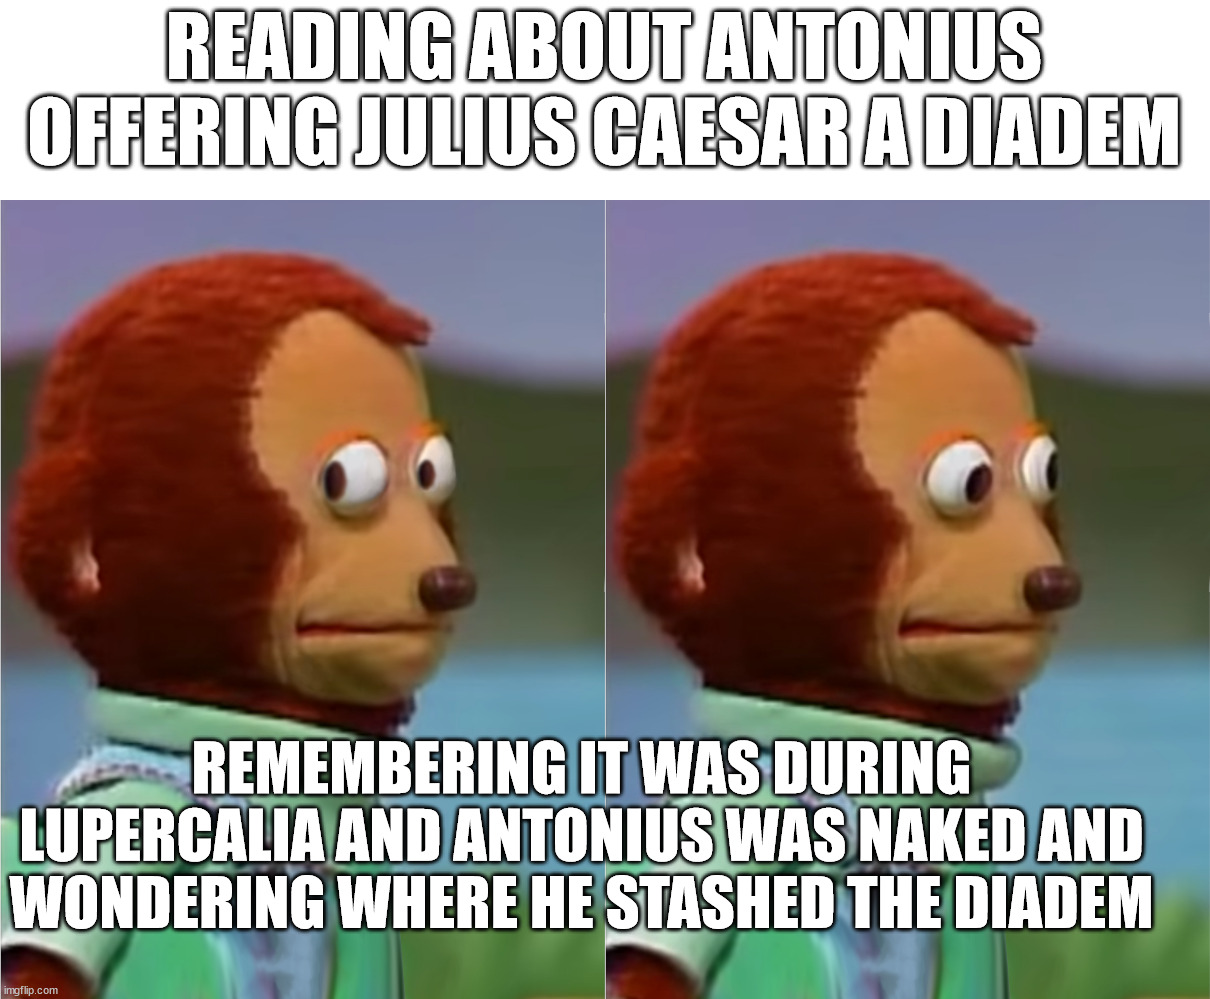 Where does he stashed the diadem? | READING ABOUT ANTONIUS OFFERING JULIUS CAESAR A DIADEM; REMEMBERING IT WAS DURING LUPERCALIA AND ANTONIUS WAS NAKED AND WONDERING WHERE HE STASHED THE DIADEM | image tagged in puppet monkey looking away,julus caesar,marcus antonius,roman history,roman republic,roman empire | made w/ Imgflip meme maker